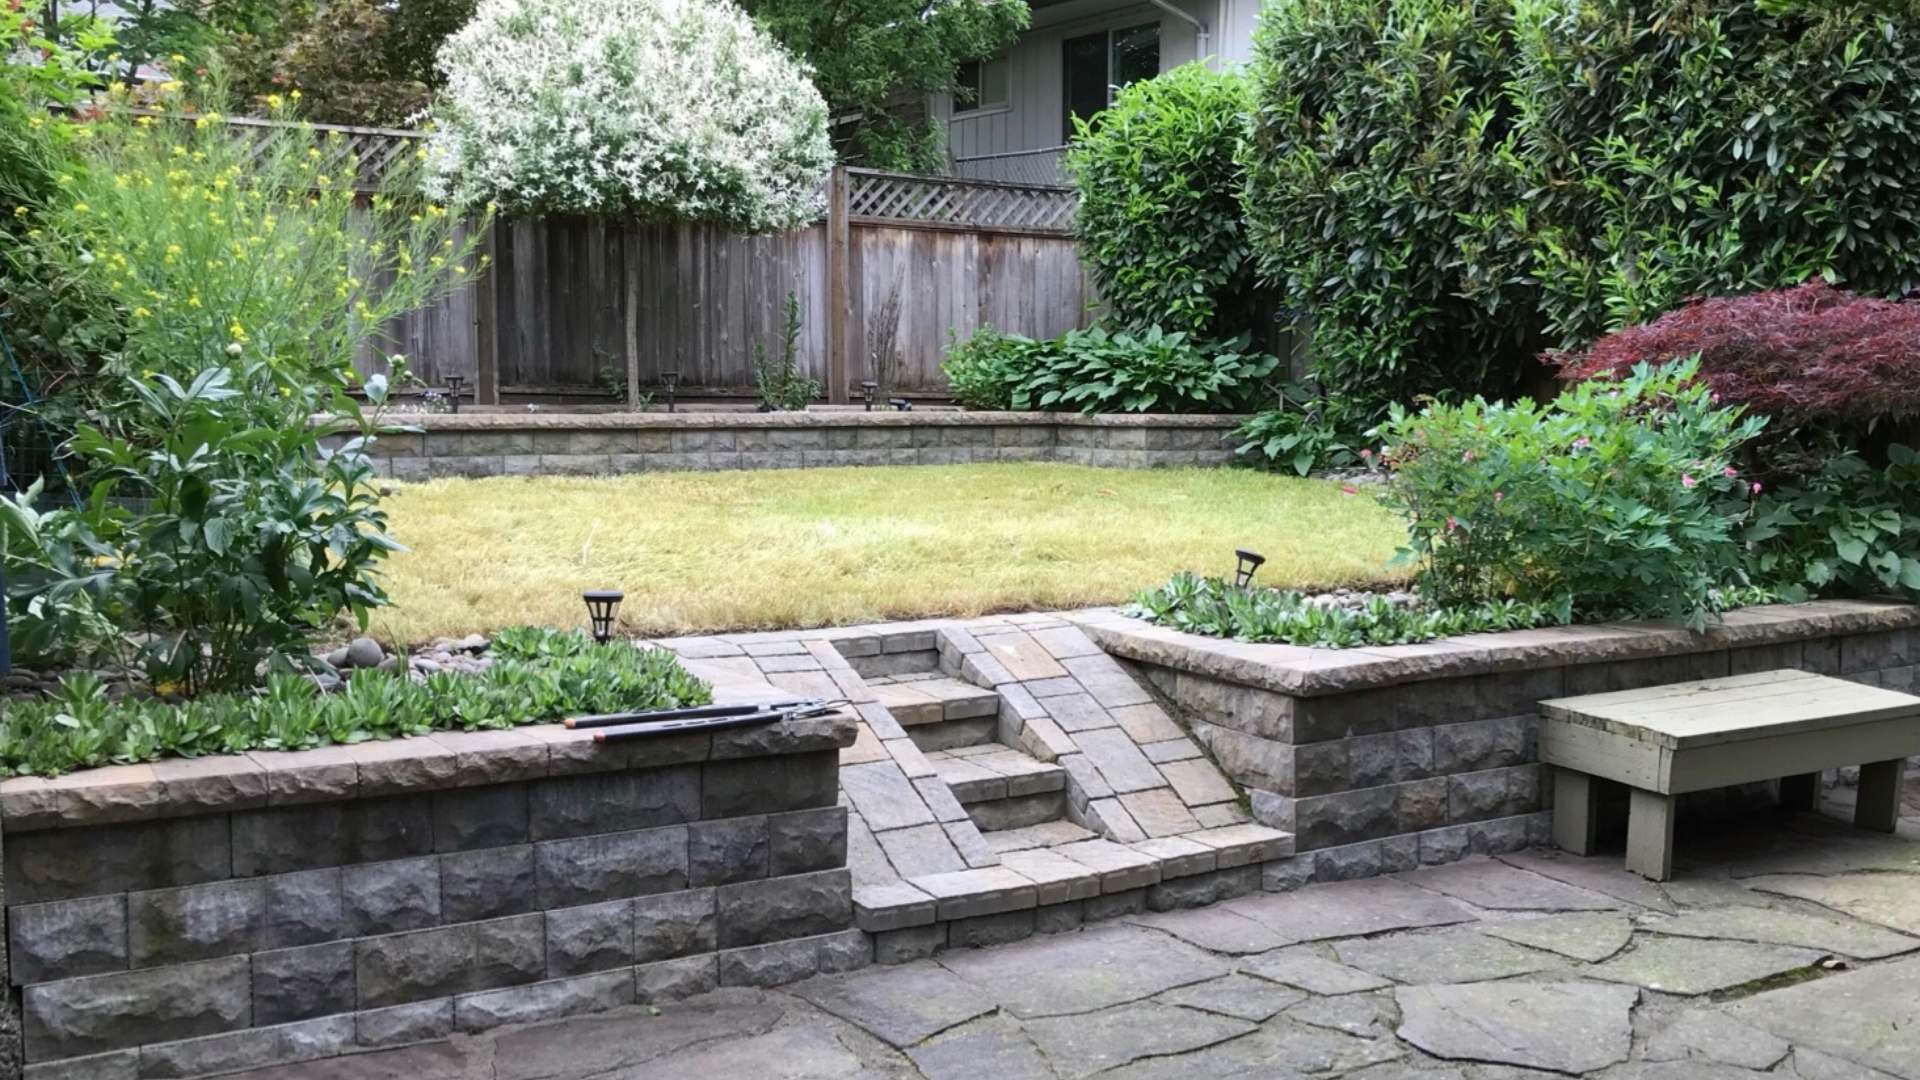 3 Common Landscape Elements to Add to Your New Patio